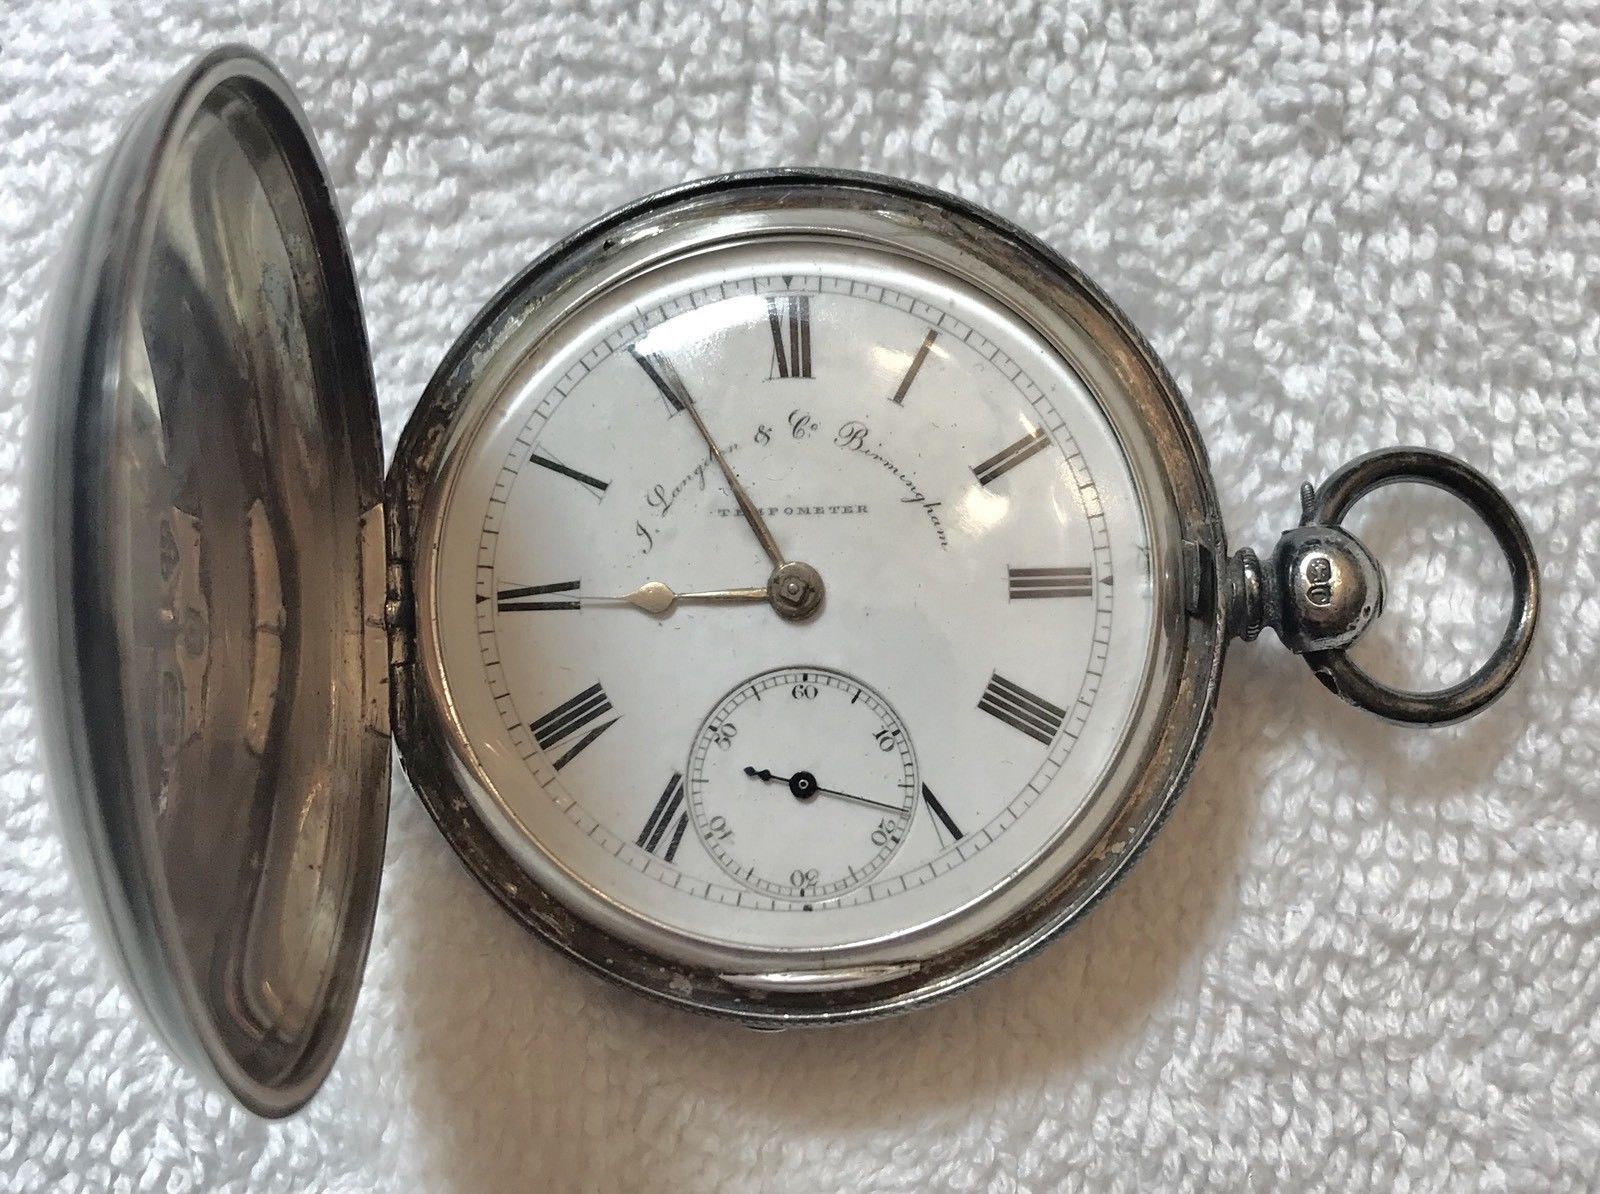 used pocket watches for sale